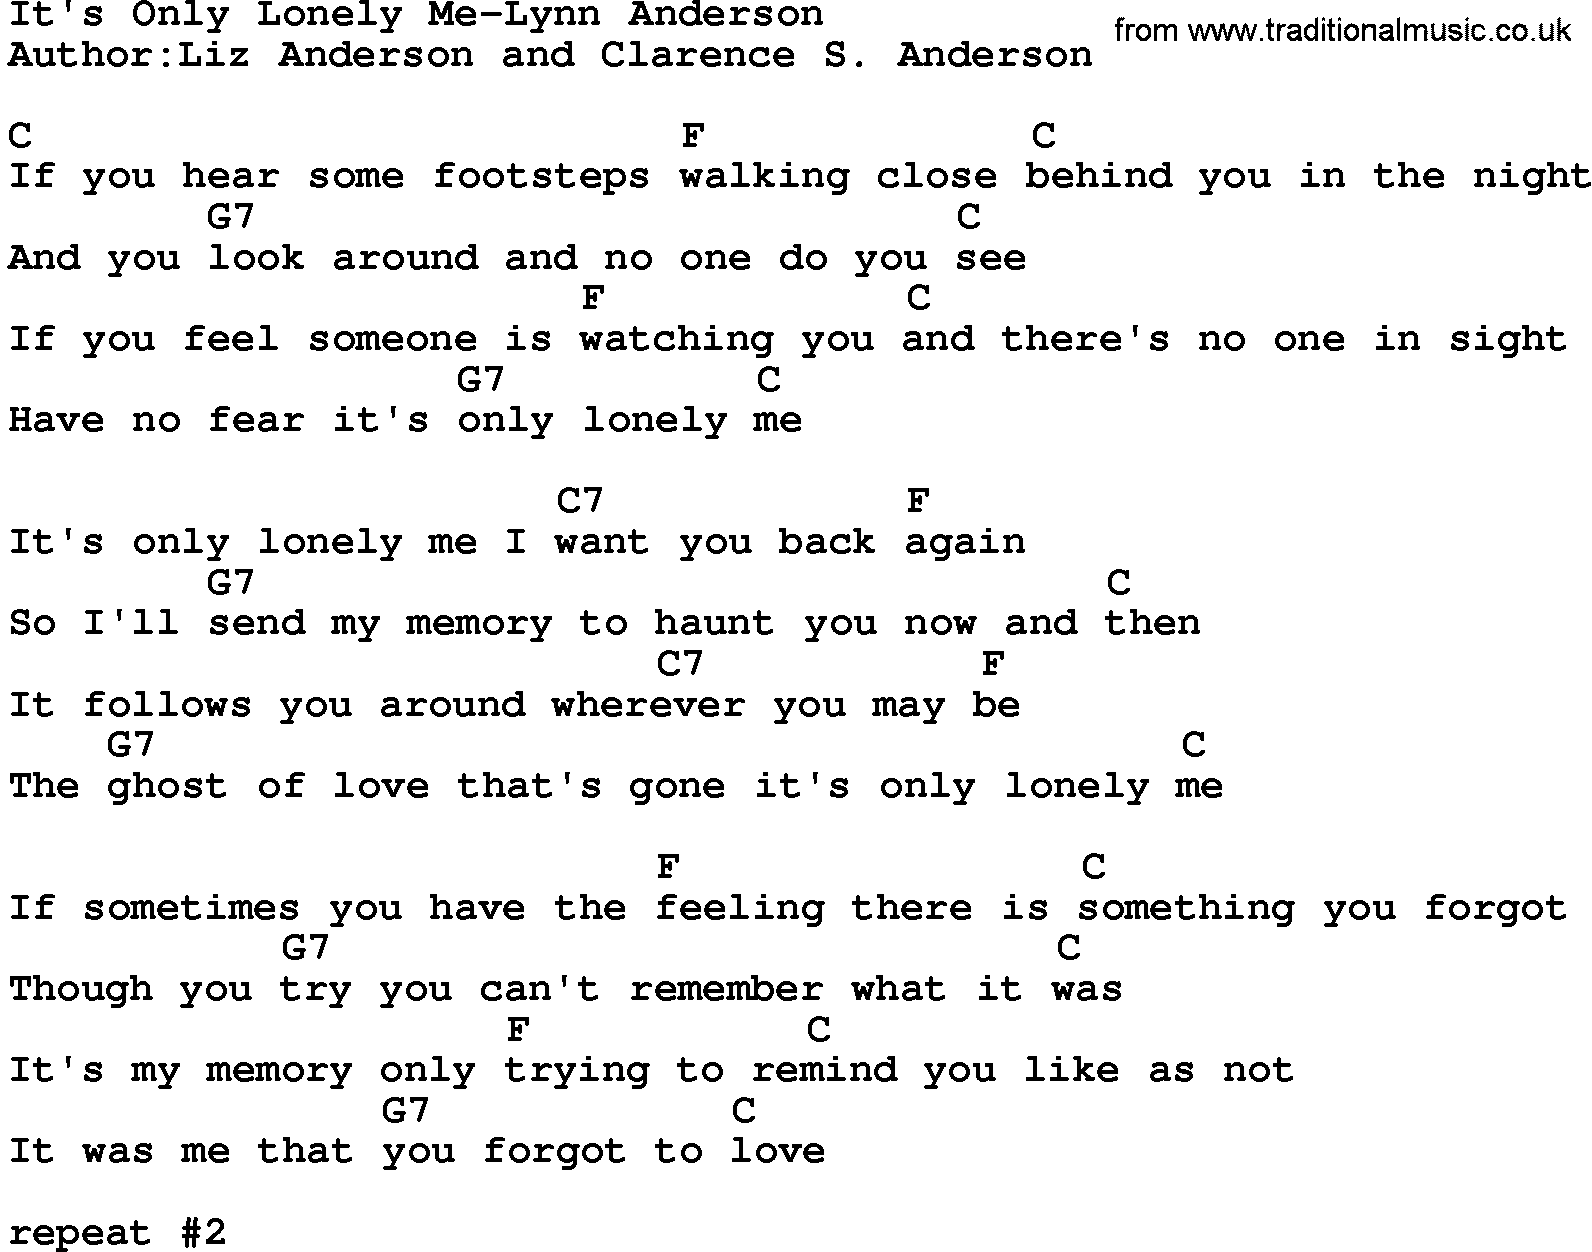 Country music song: It's Only Lonely Me-Lynn Anderson lyrics and chords